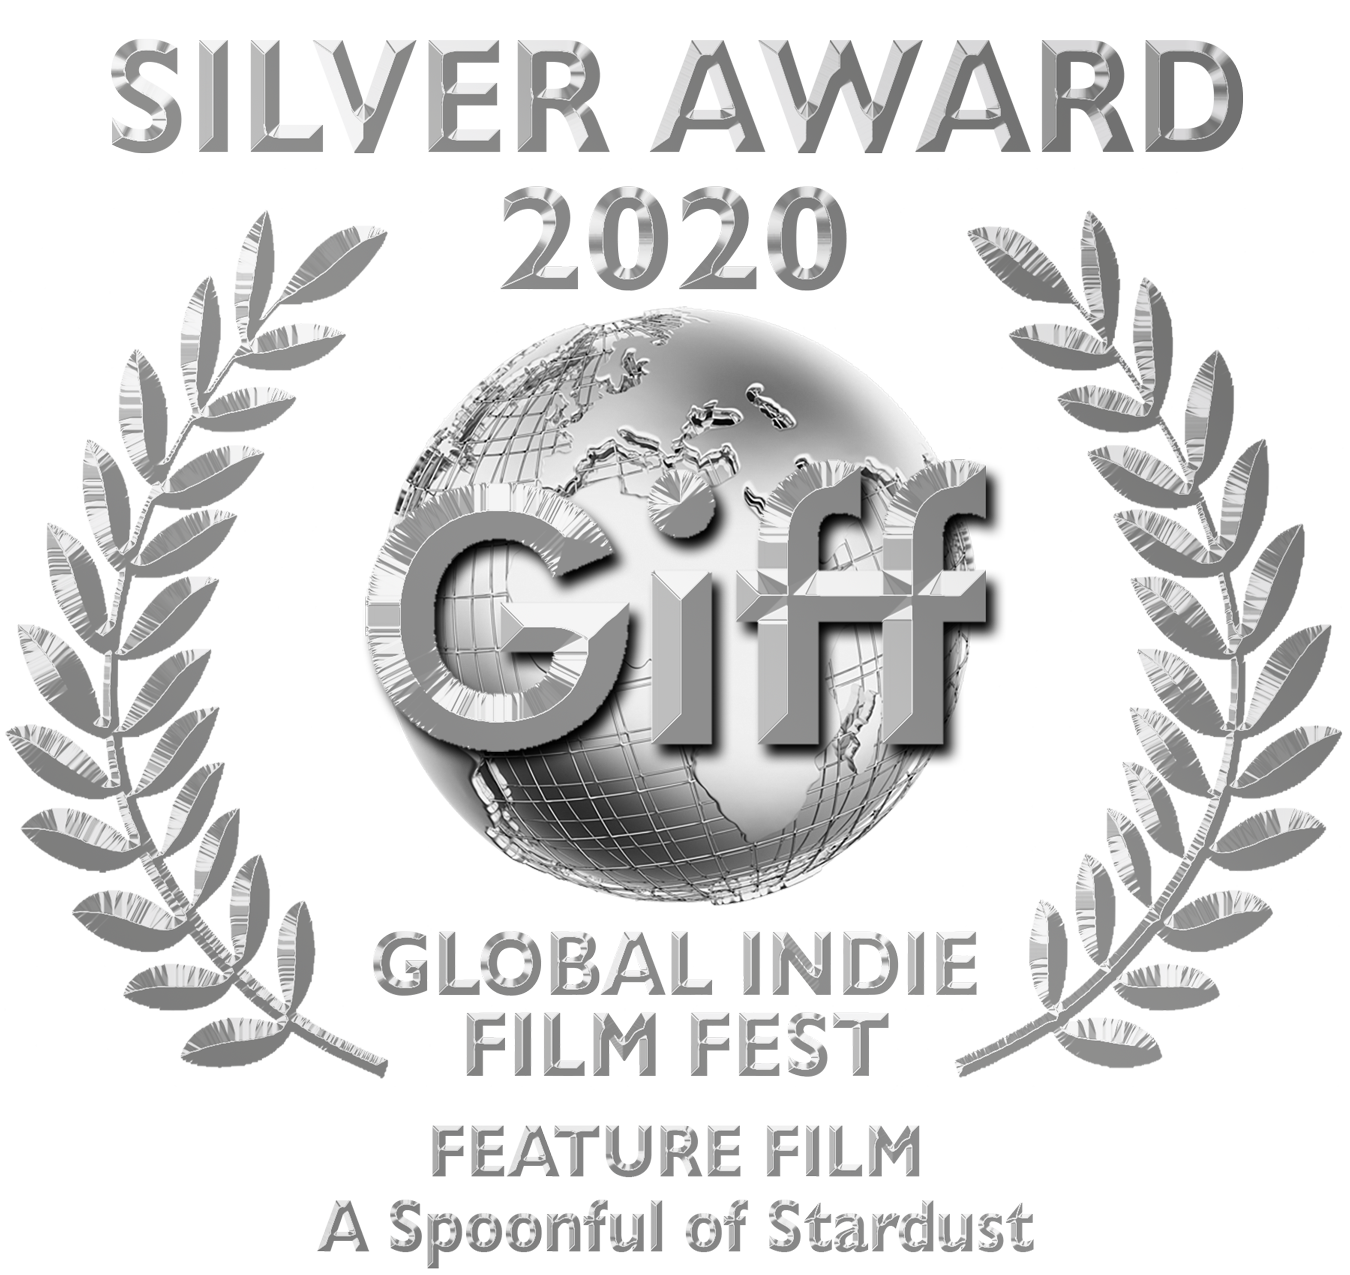 Giff Silver Award Feature